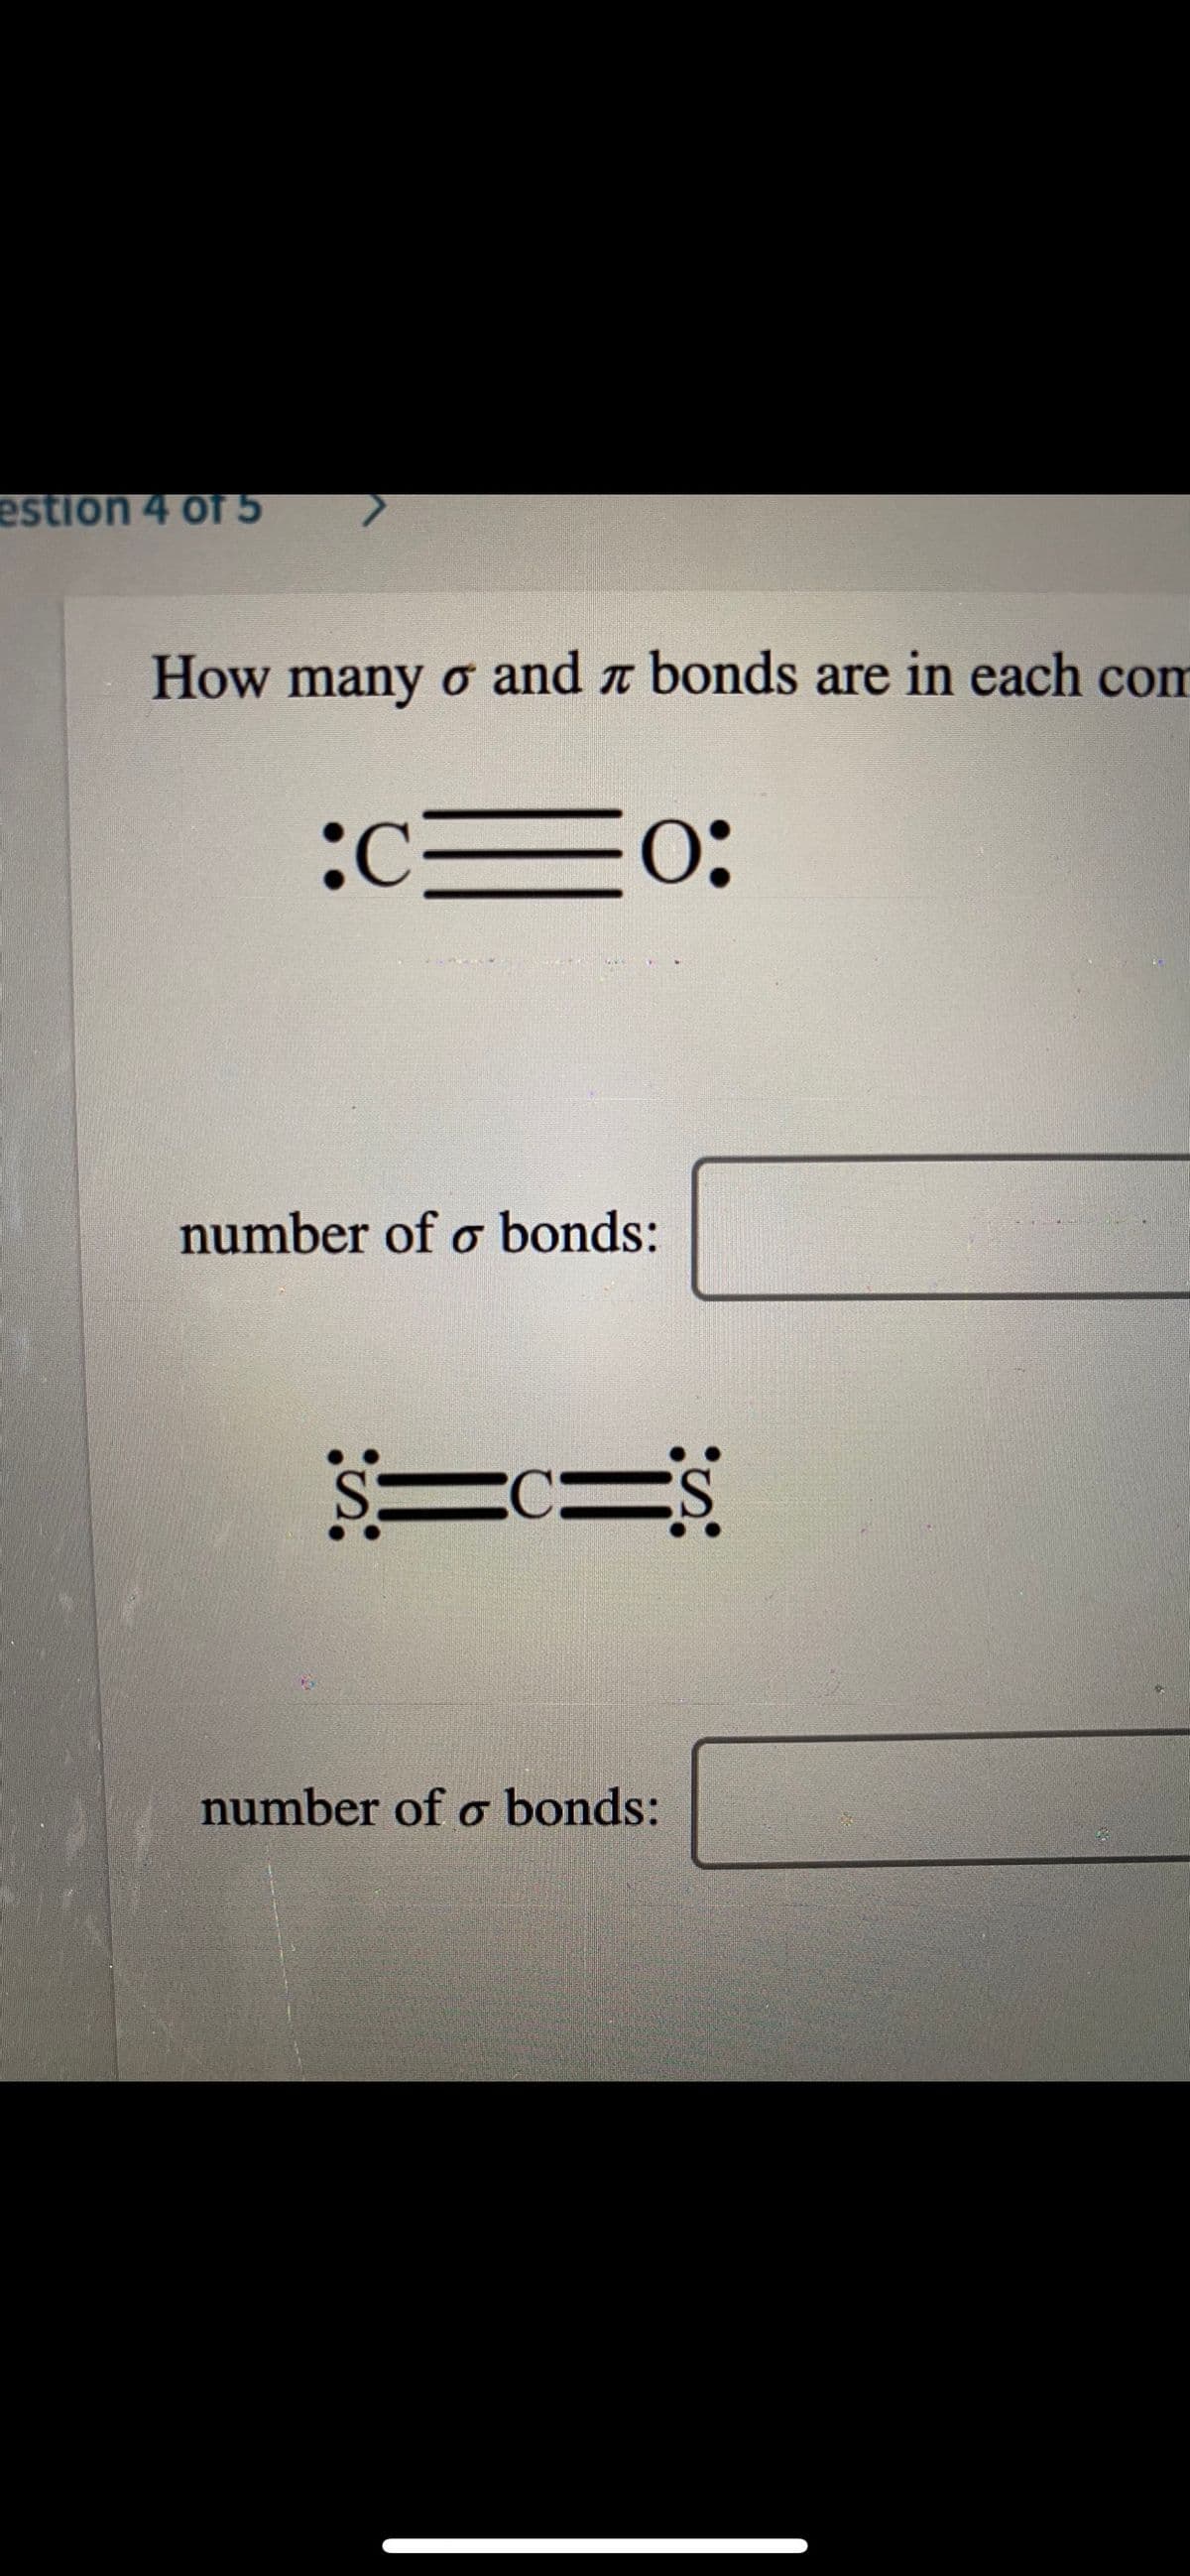 estion 4 of 5
How many o and a bonds are in each com
:c=0:
number of o bonds:
number of o bonds:
